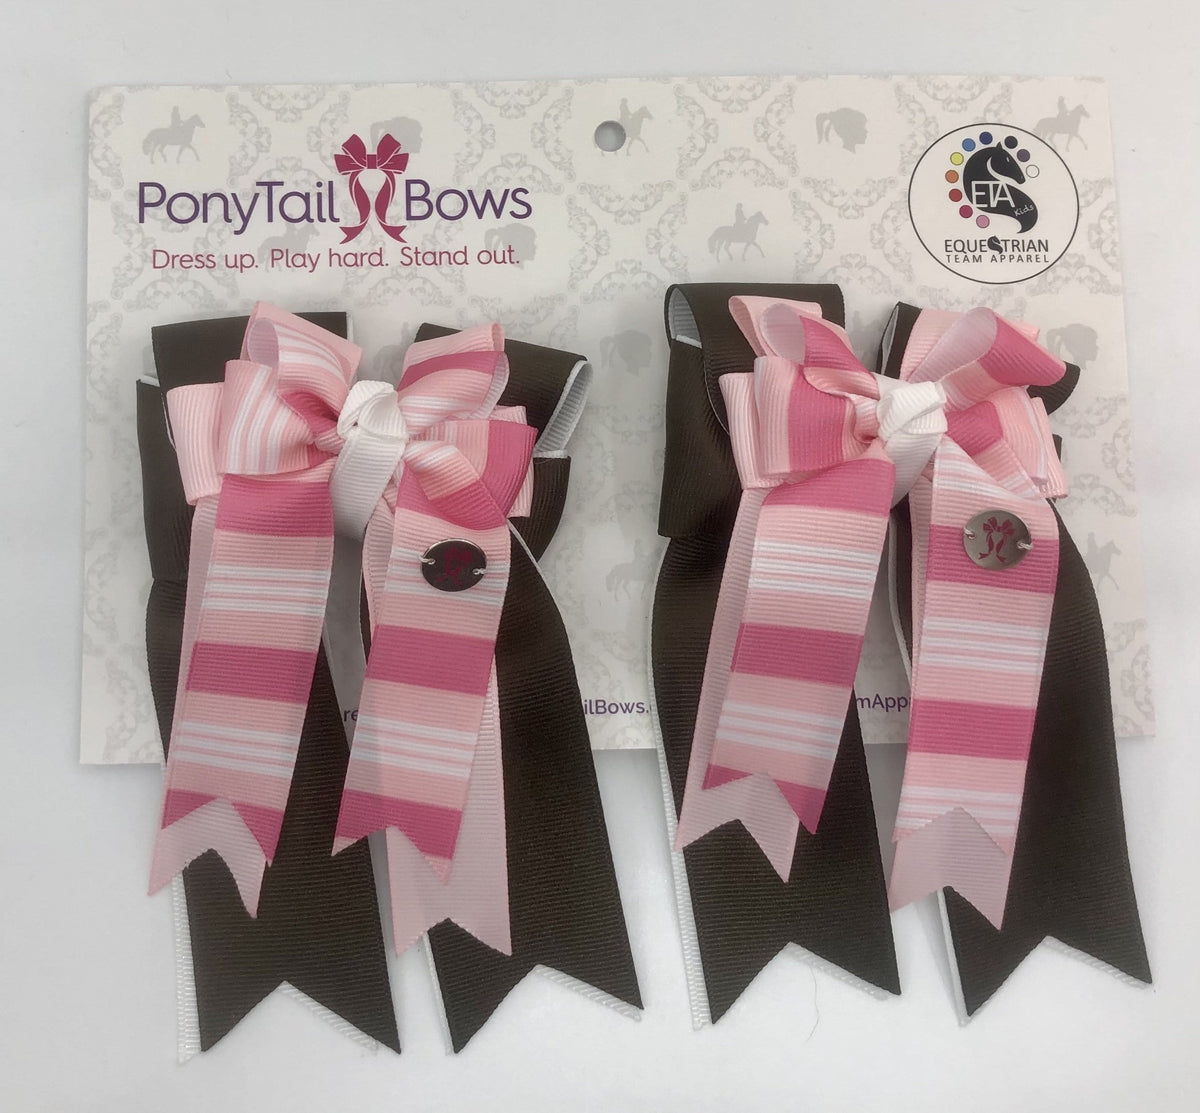 PonyTail Bows 3" Tails Brown Pink Stripes PonyTail Bows equestrian team apparel online tack store mobile tack store custom farm apparel custom show stable clothing equestrian lifestyle horse show clothing riding clothes PonyTail Bows | Equestrian Hair Accessories horses equestrian tack store